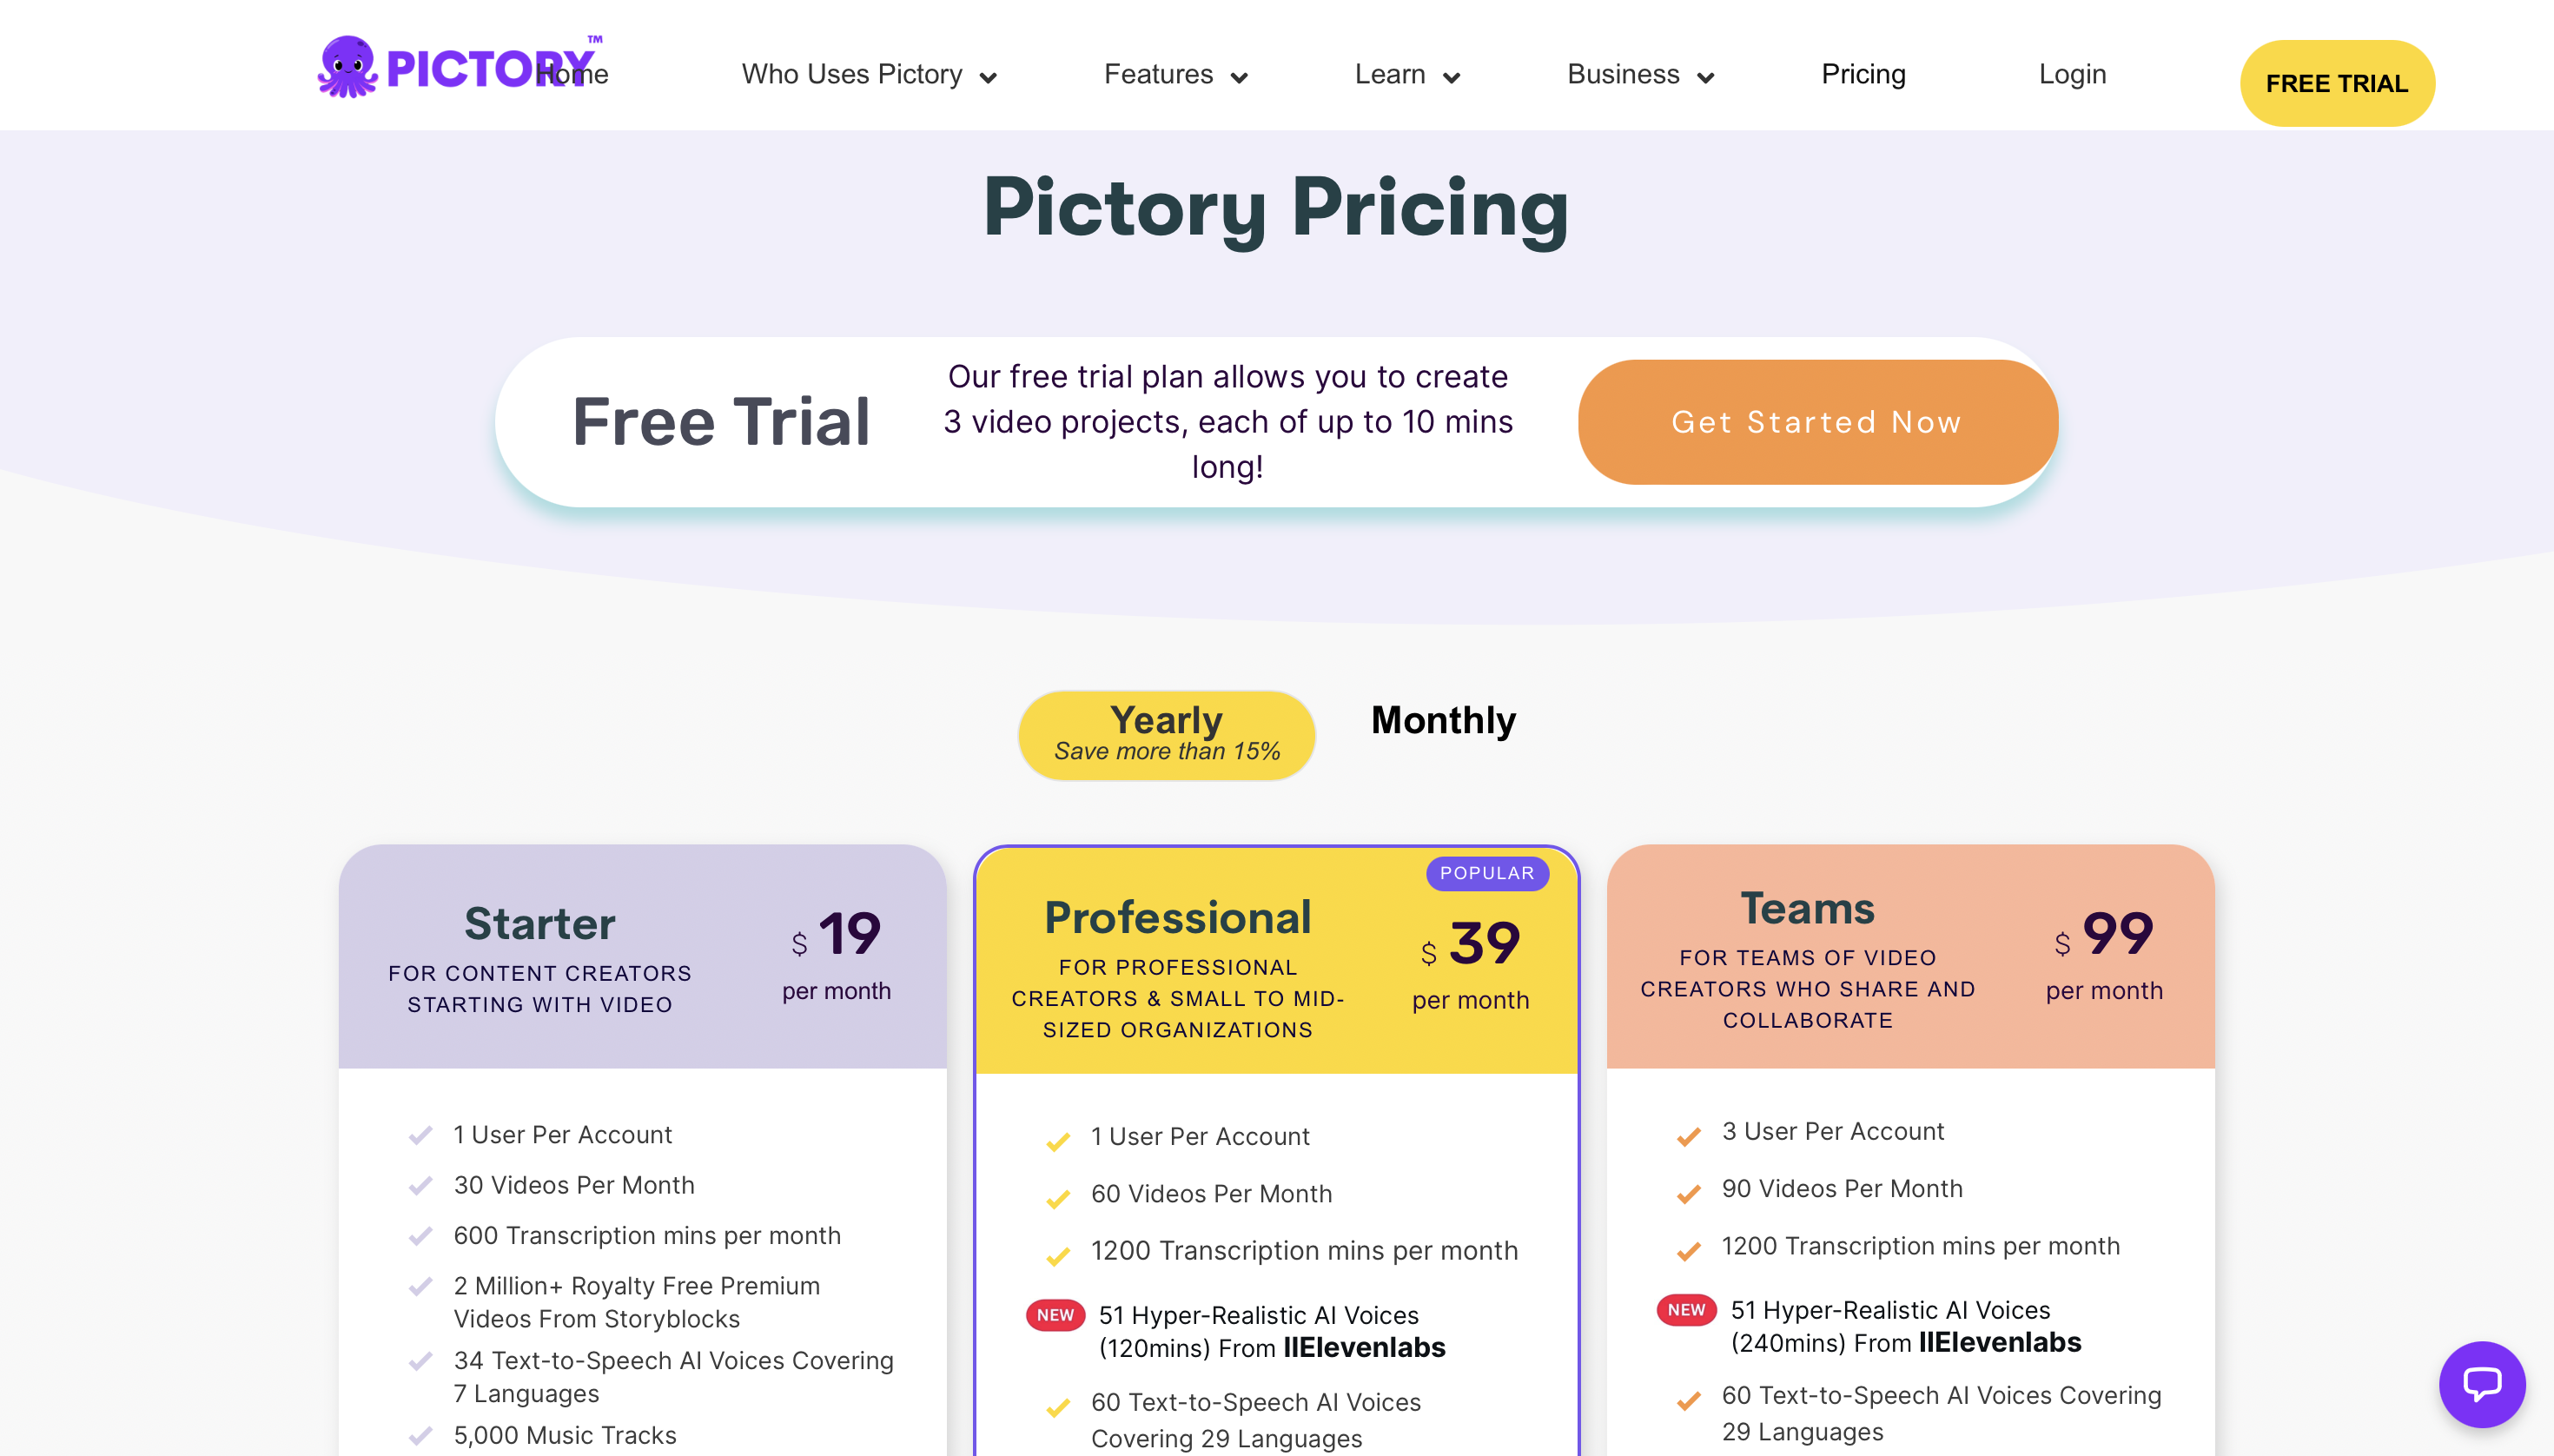 Pictory Pricing